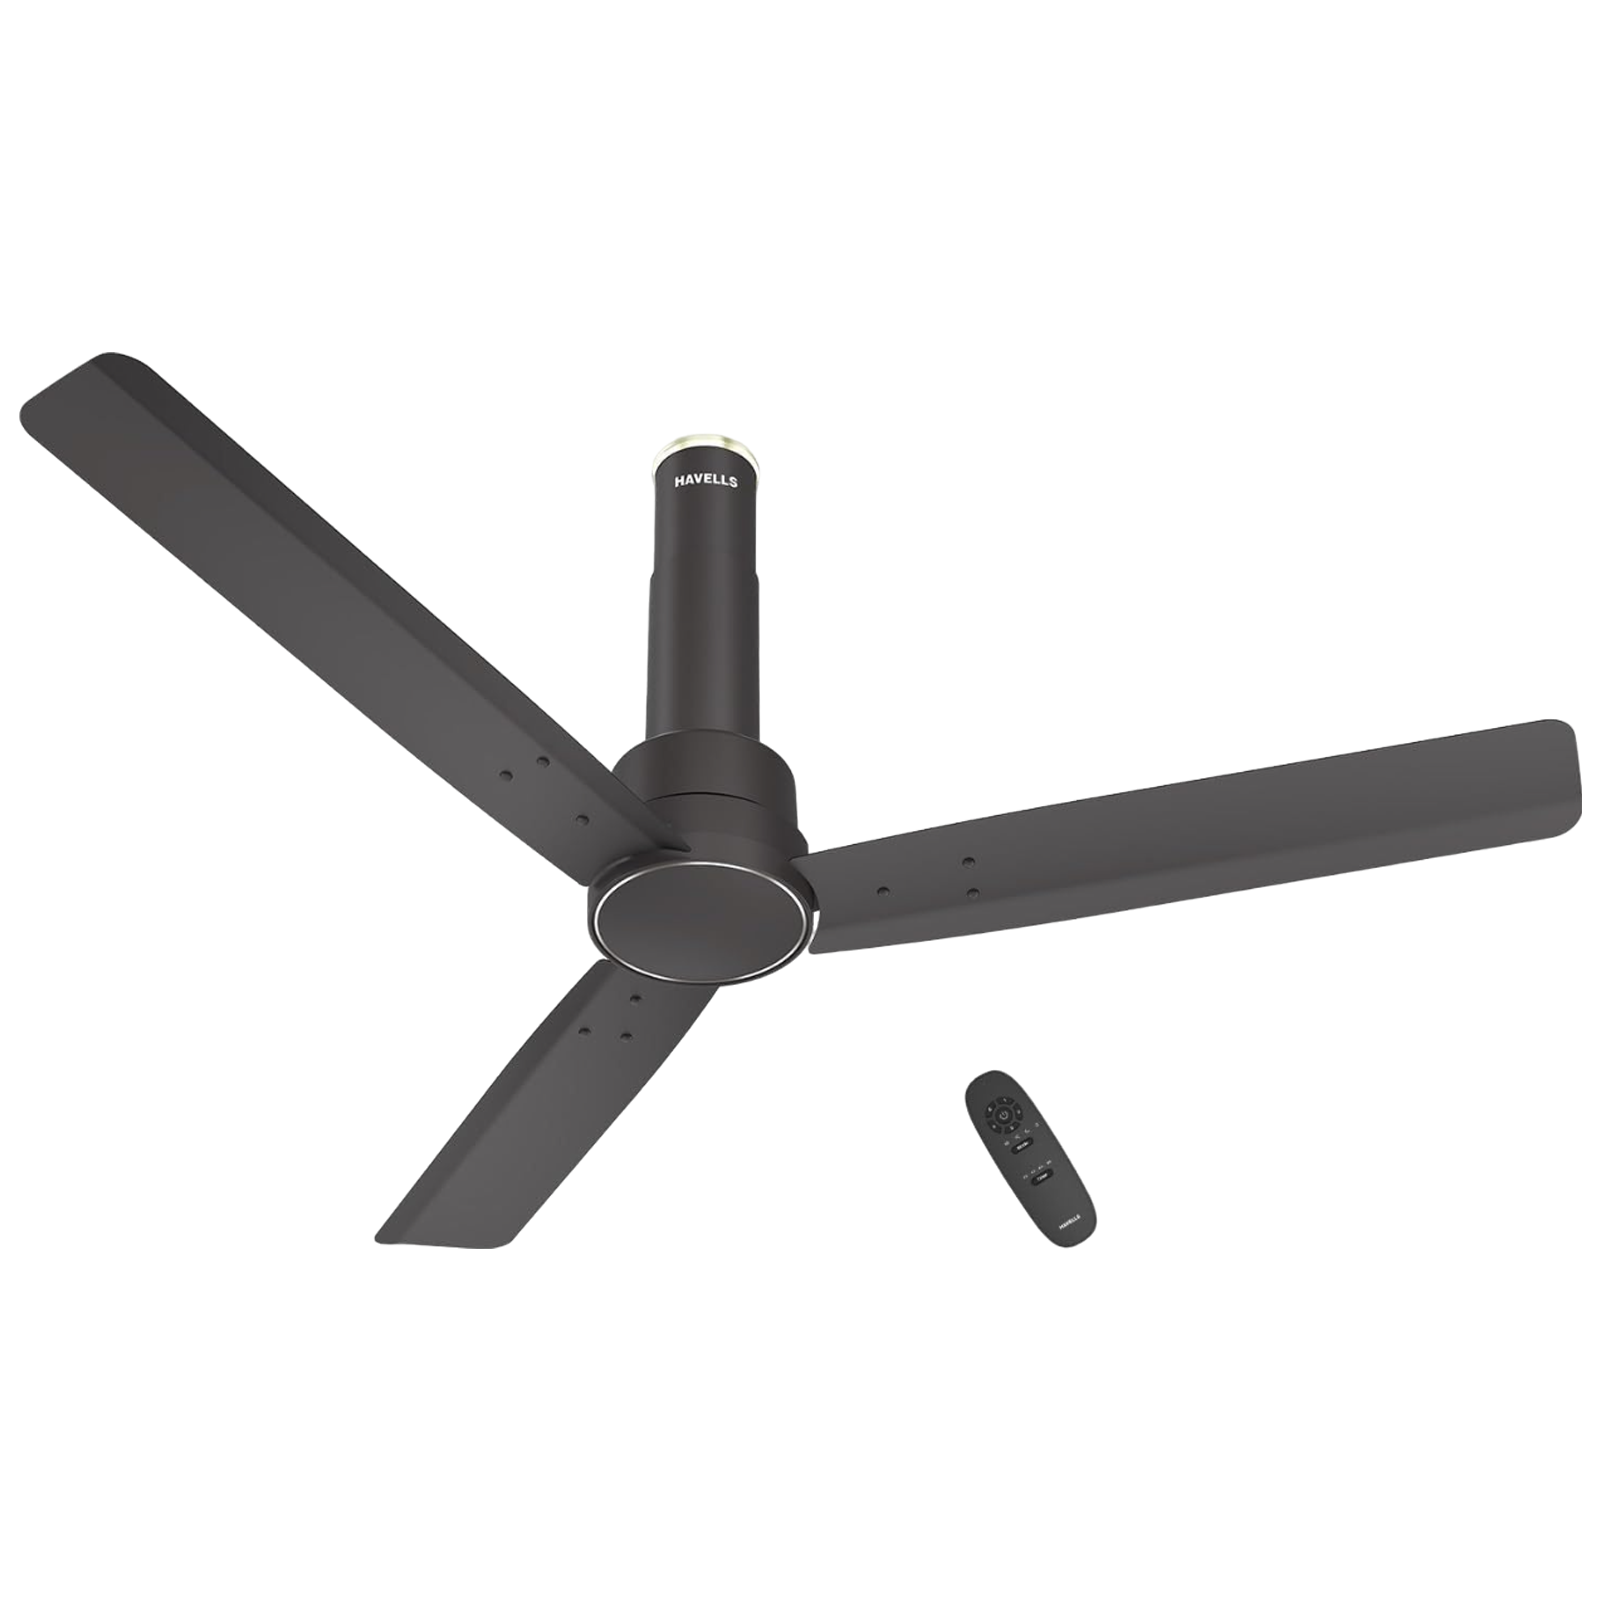 

HAVELLS Elio 5 Star 1200mm 3 Blade BLDC Motor Ceiling Fan with Remote (Wood Finished Blades, Smoke Brown), ‎smoke brown